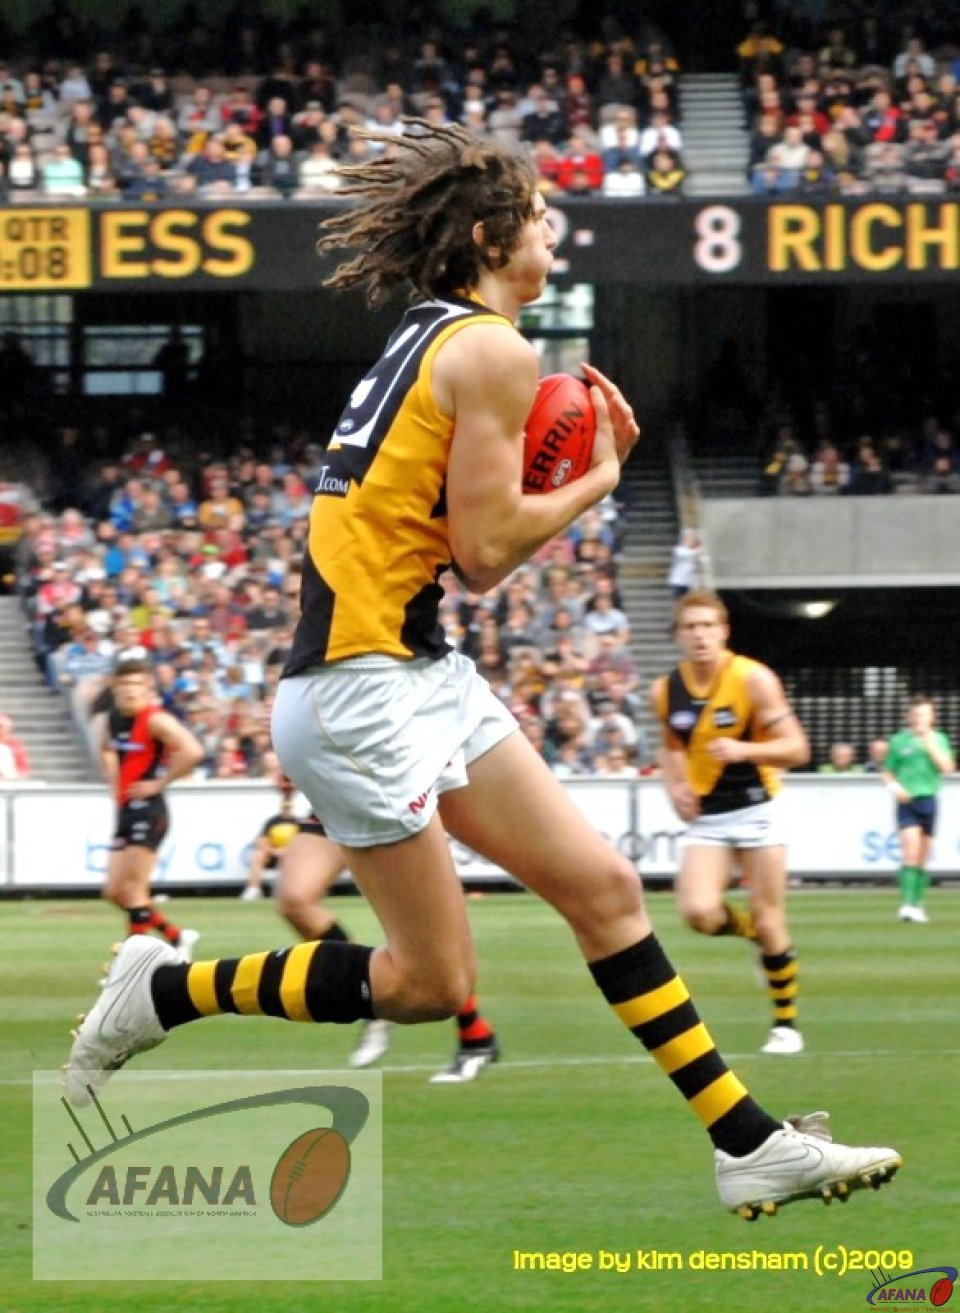 Tyrone Vickery On The Lead